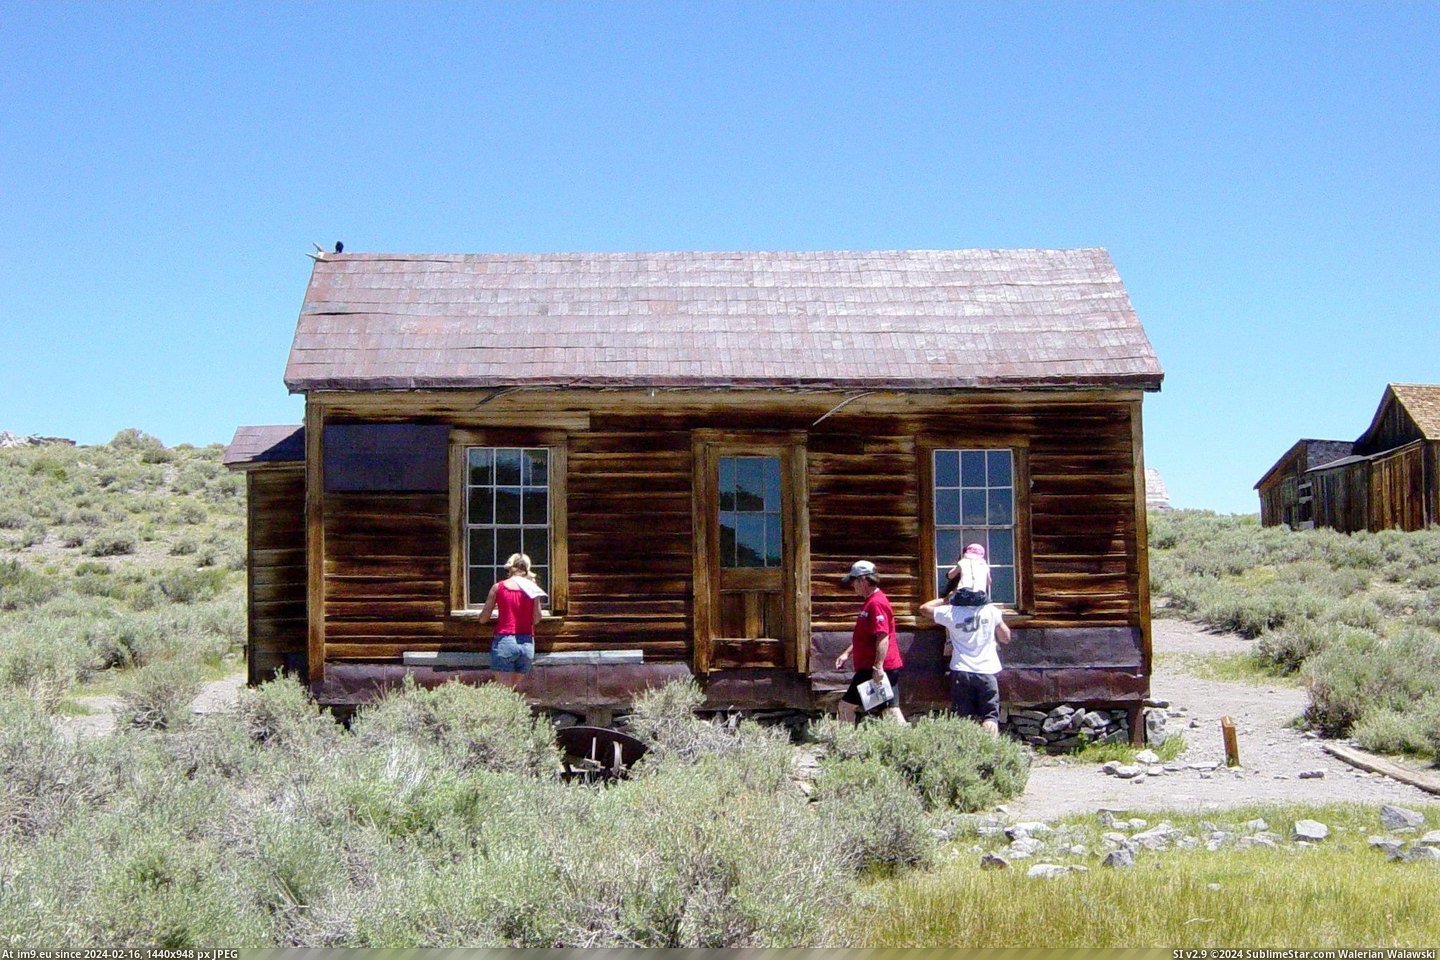 Dolan House In Bodie, California (in Bodie - a ghost town in Eastern California)